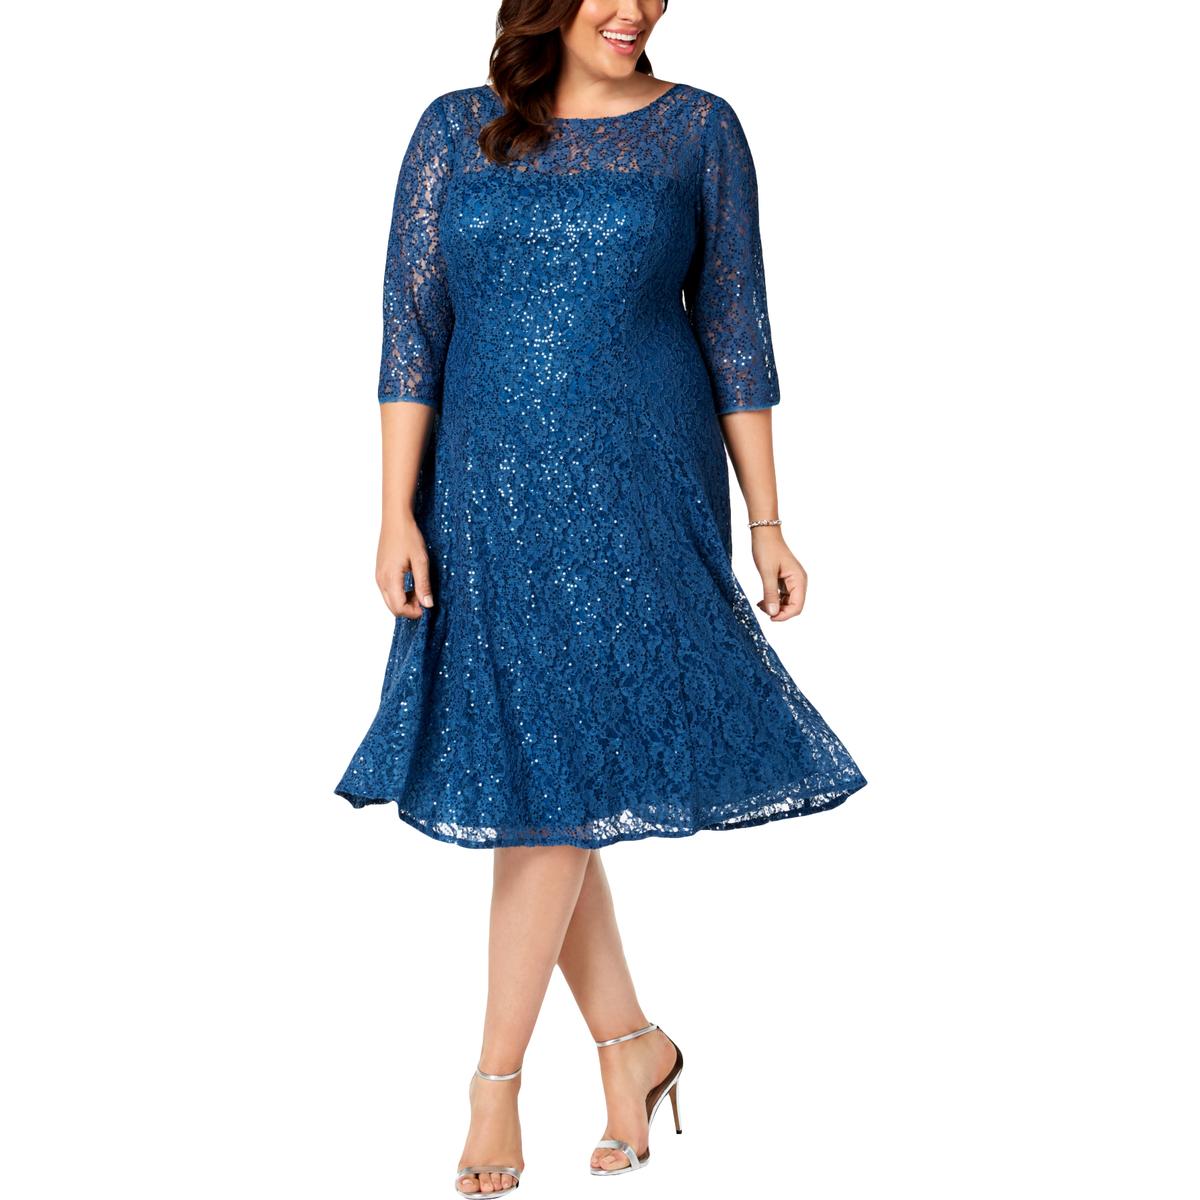 SLNY Womens Blue Sequined Lace Party Cocktail Dress Plus 18W BHFO 8277 ...